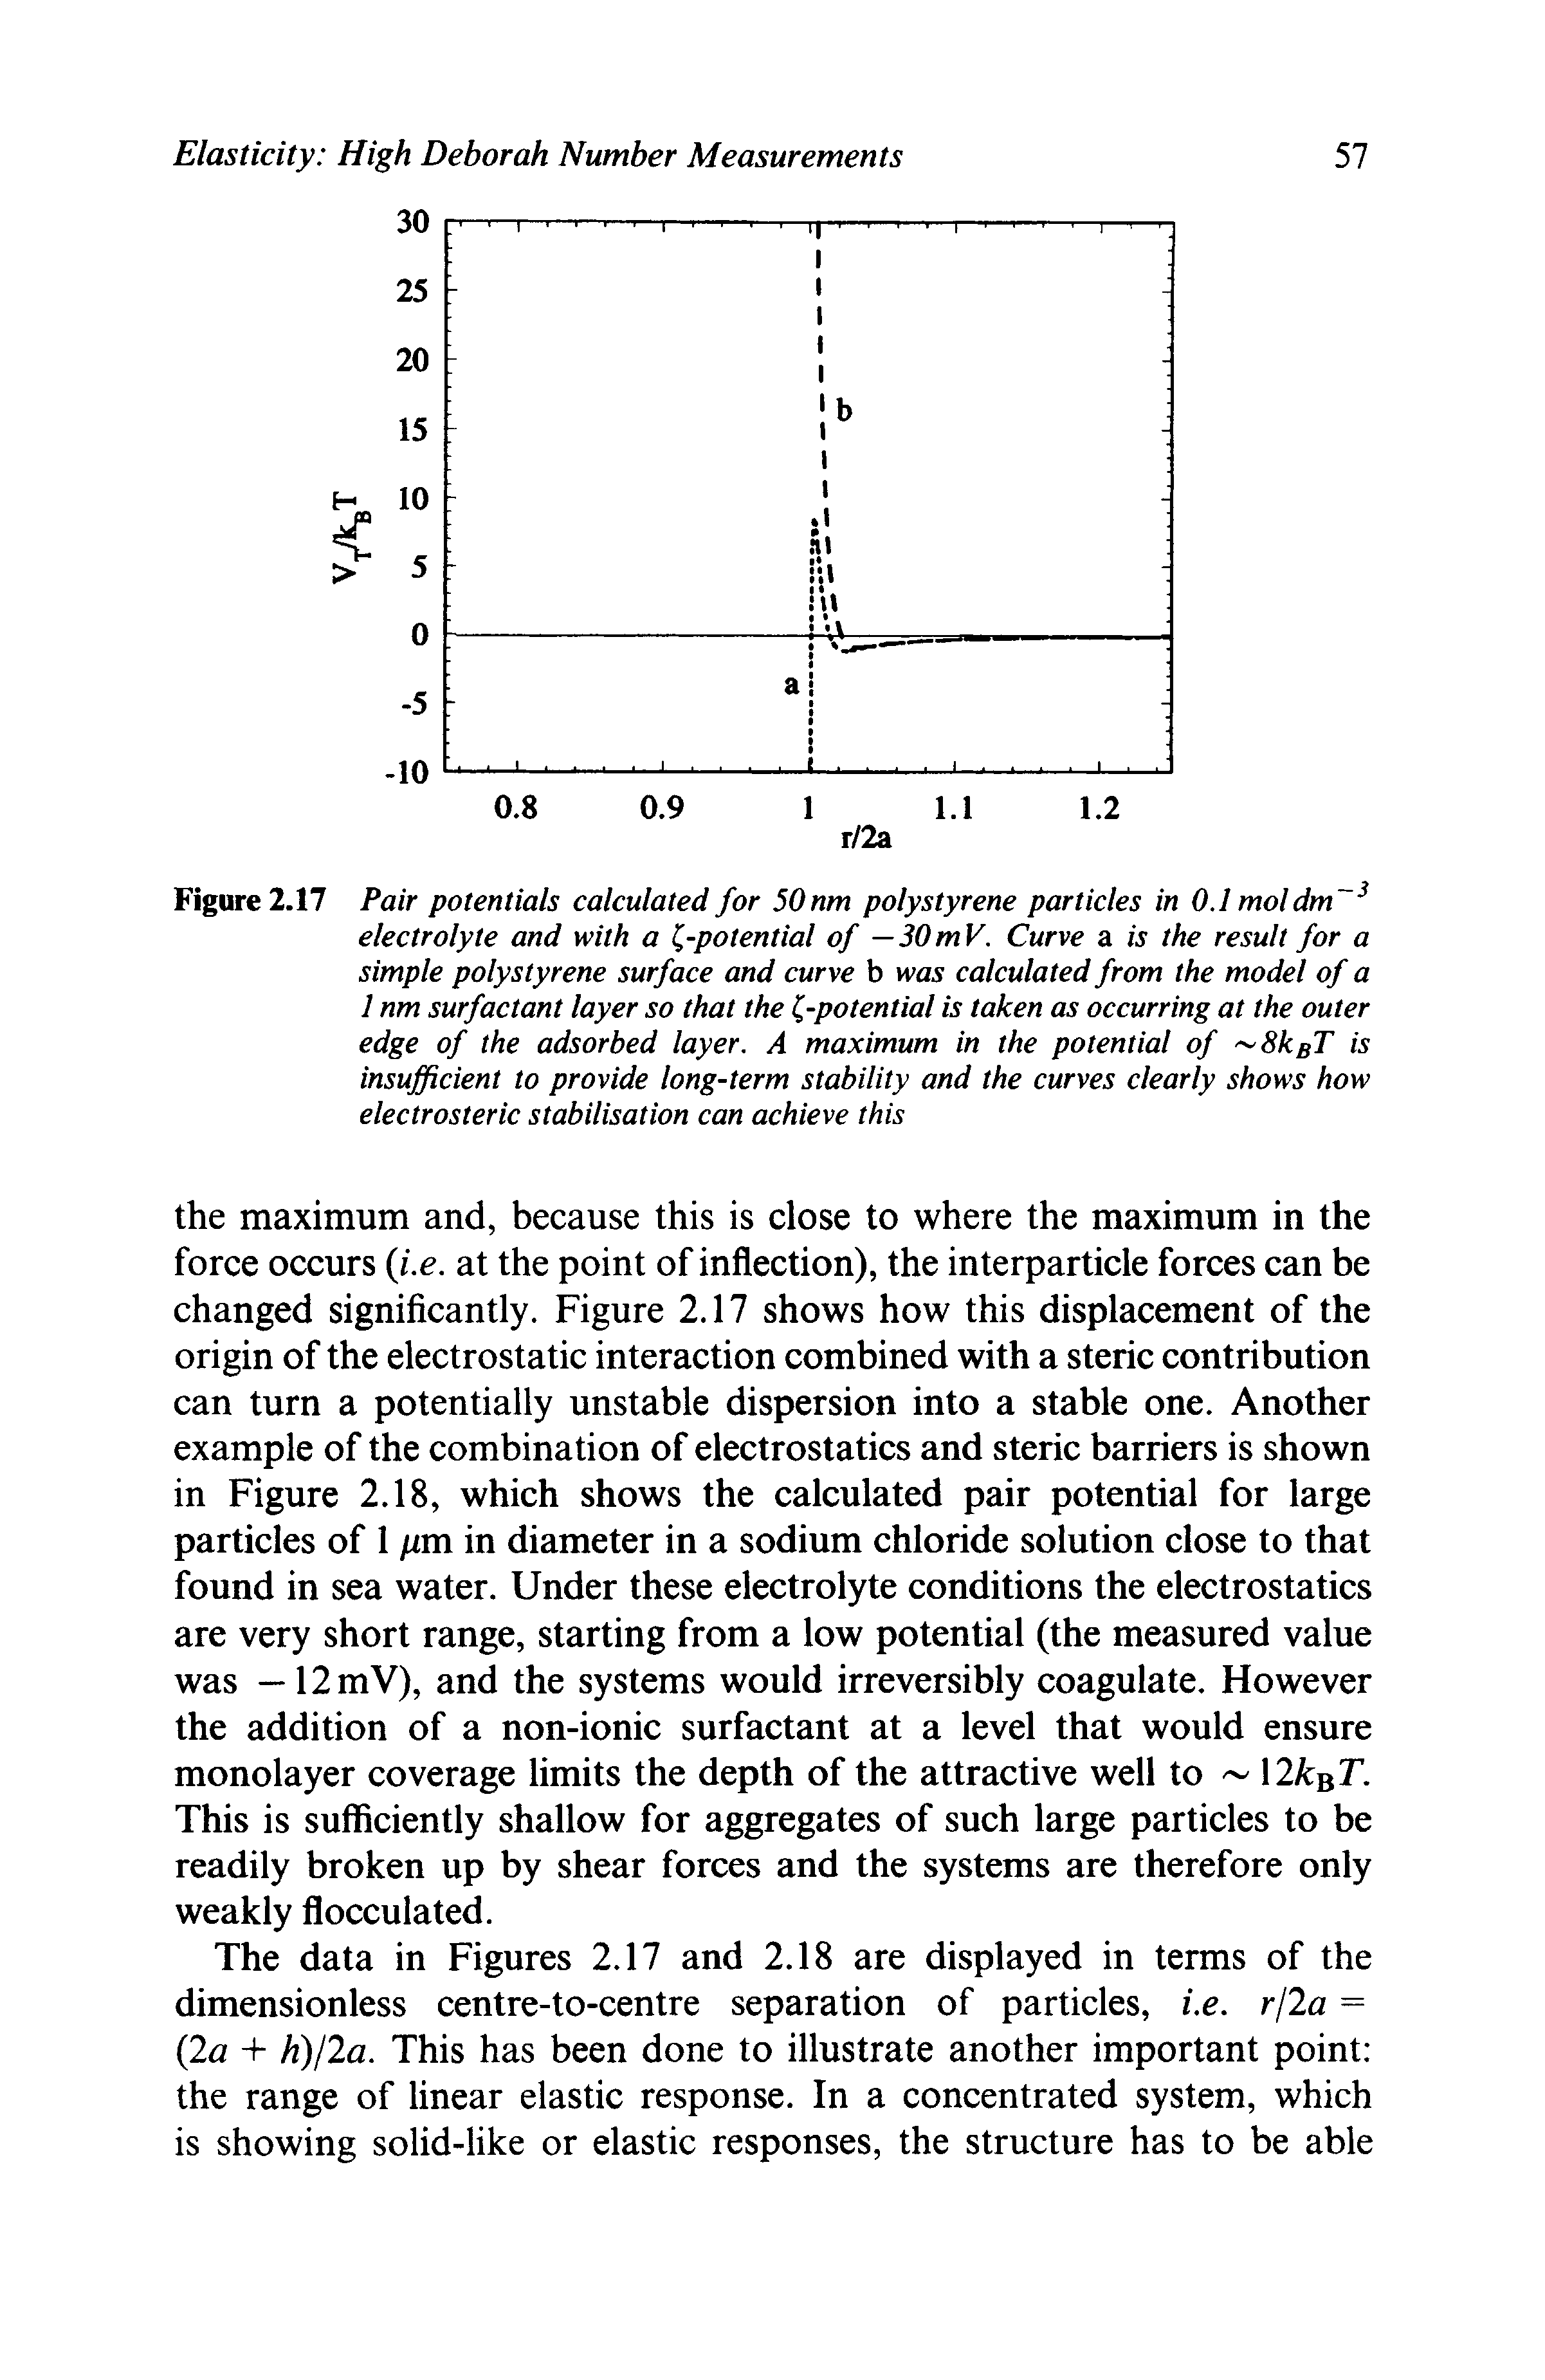 Figure 2.17 Pair potentials calculated for 50 nm polystyrene particles in 0.1 moldm 3 electrolyte and with a -potential of —30mV. Curve a is the result for a simple polystyrene surface and curve b was calculated from the model of a 1 nm surfactant layer so that the -potential is taken as occurring at the outer edge of the adsorbed layer. A maximum in the potential of 8kBT is insufficient to provide long-term stability and the curves clearly shows how electrosteric stabilisation can achieve this...